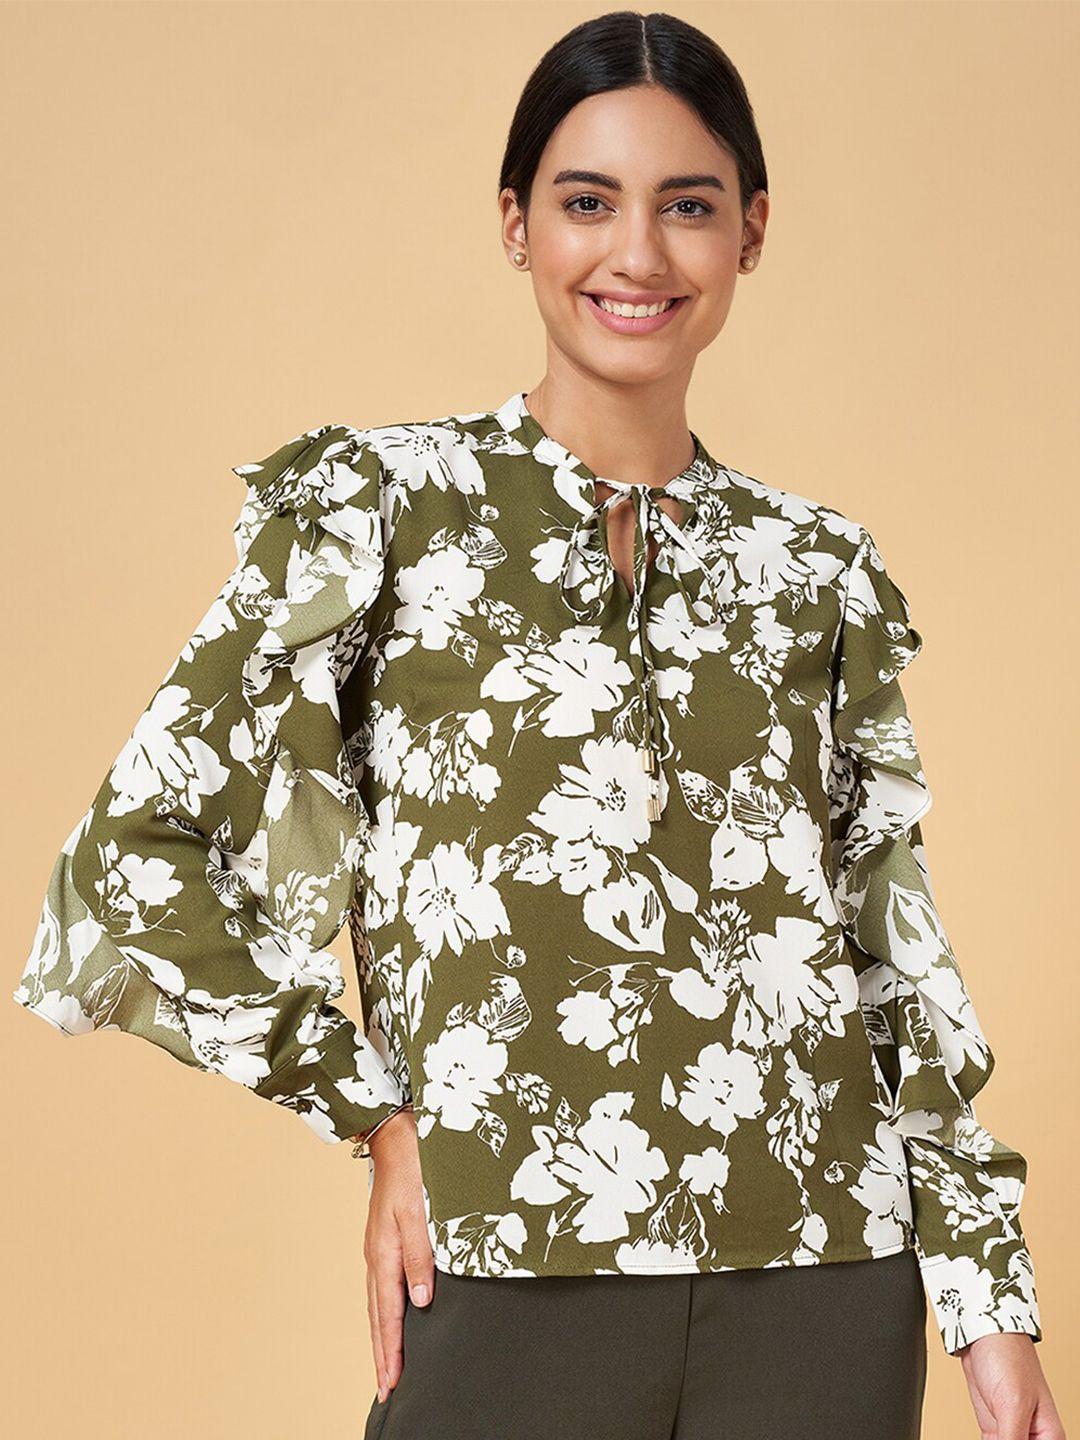 annabelle by pantaloons floral print cuffed sleeves ruffle detail tie-up neck top